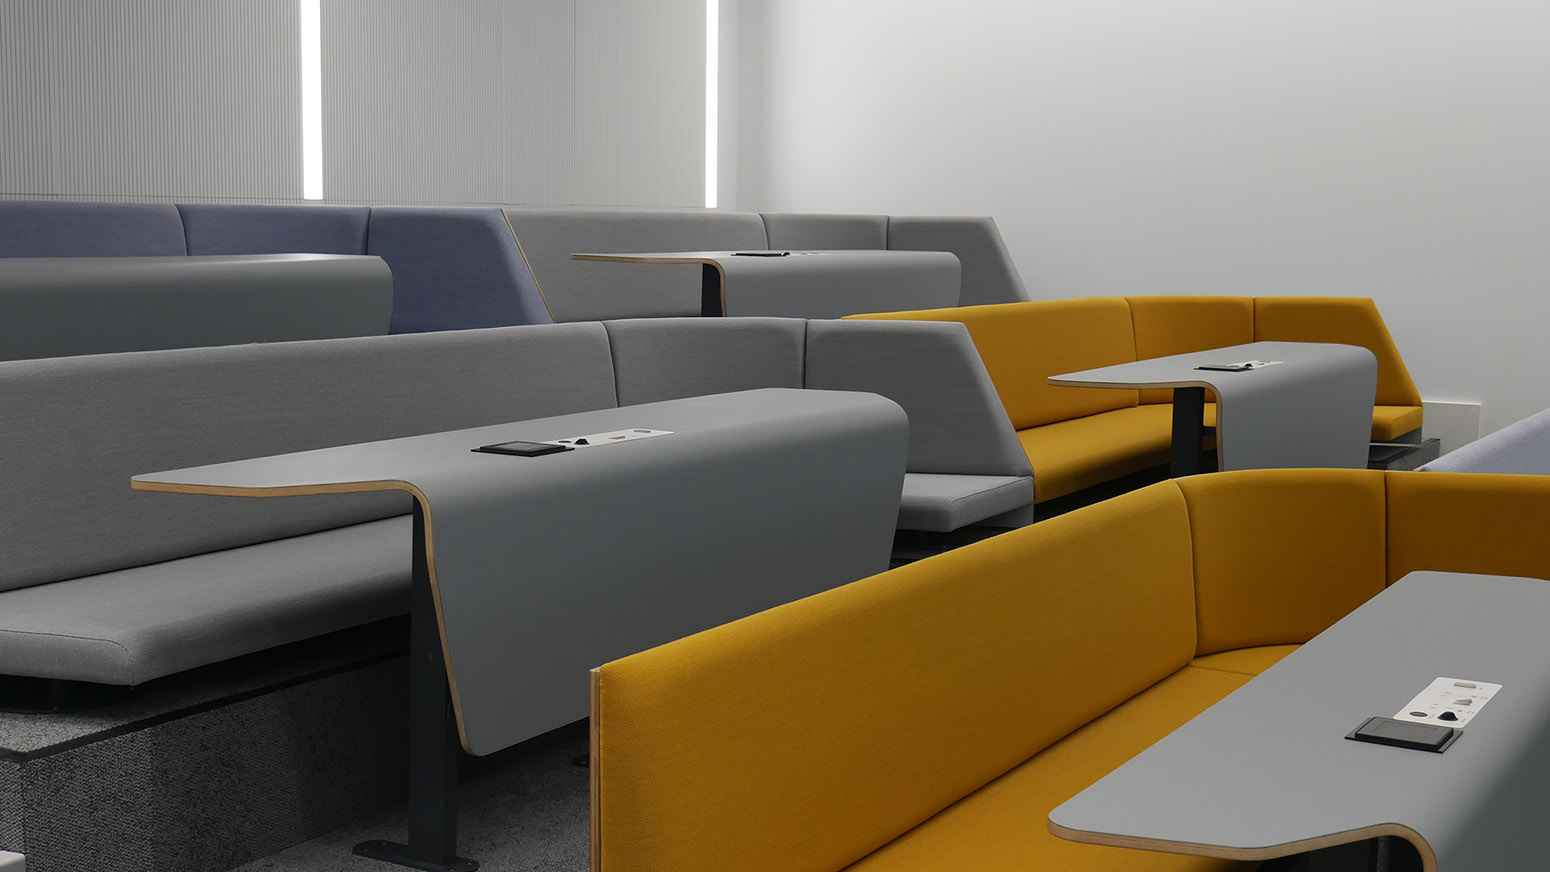 rows of lecture theatre seating modern desks